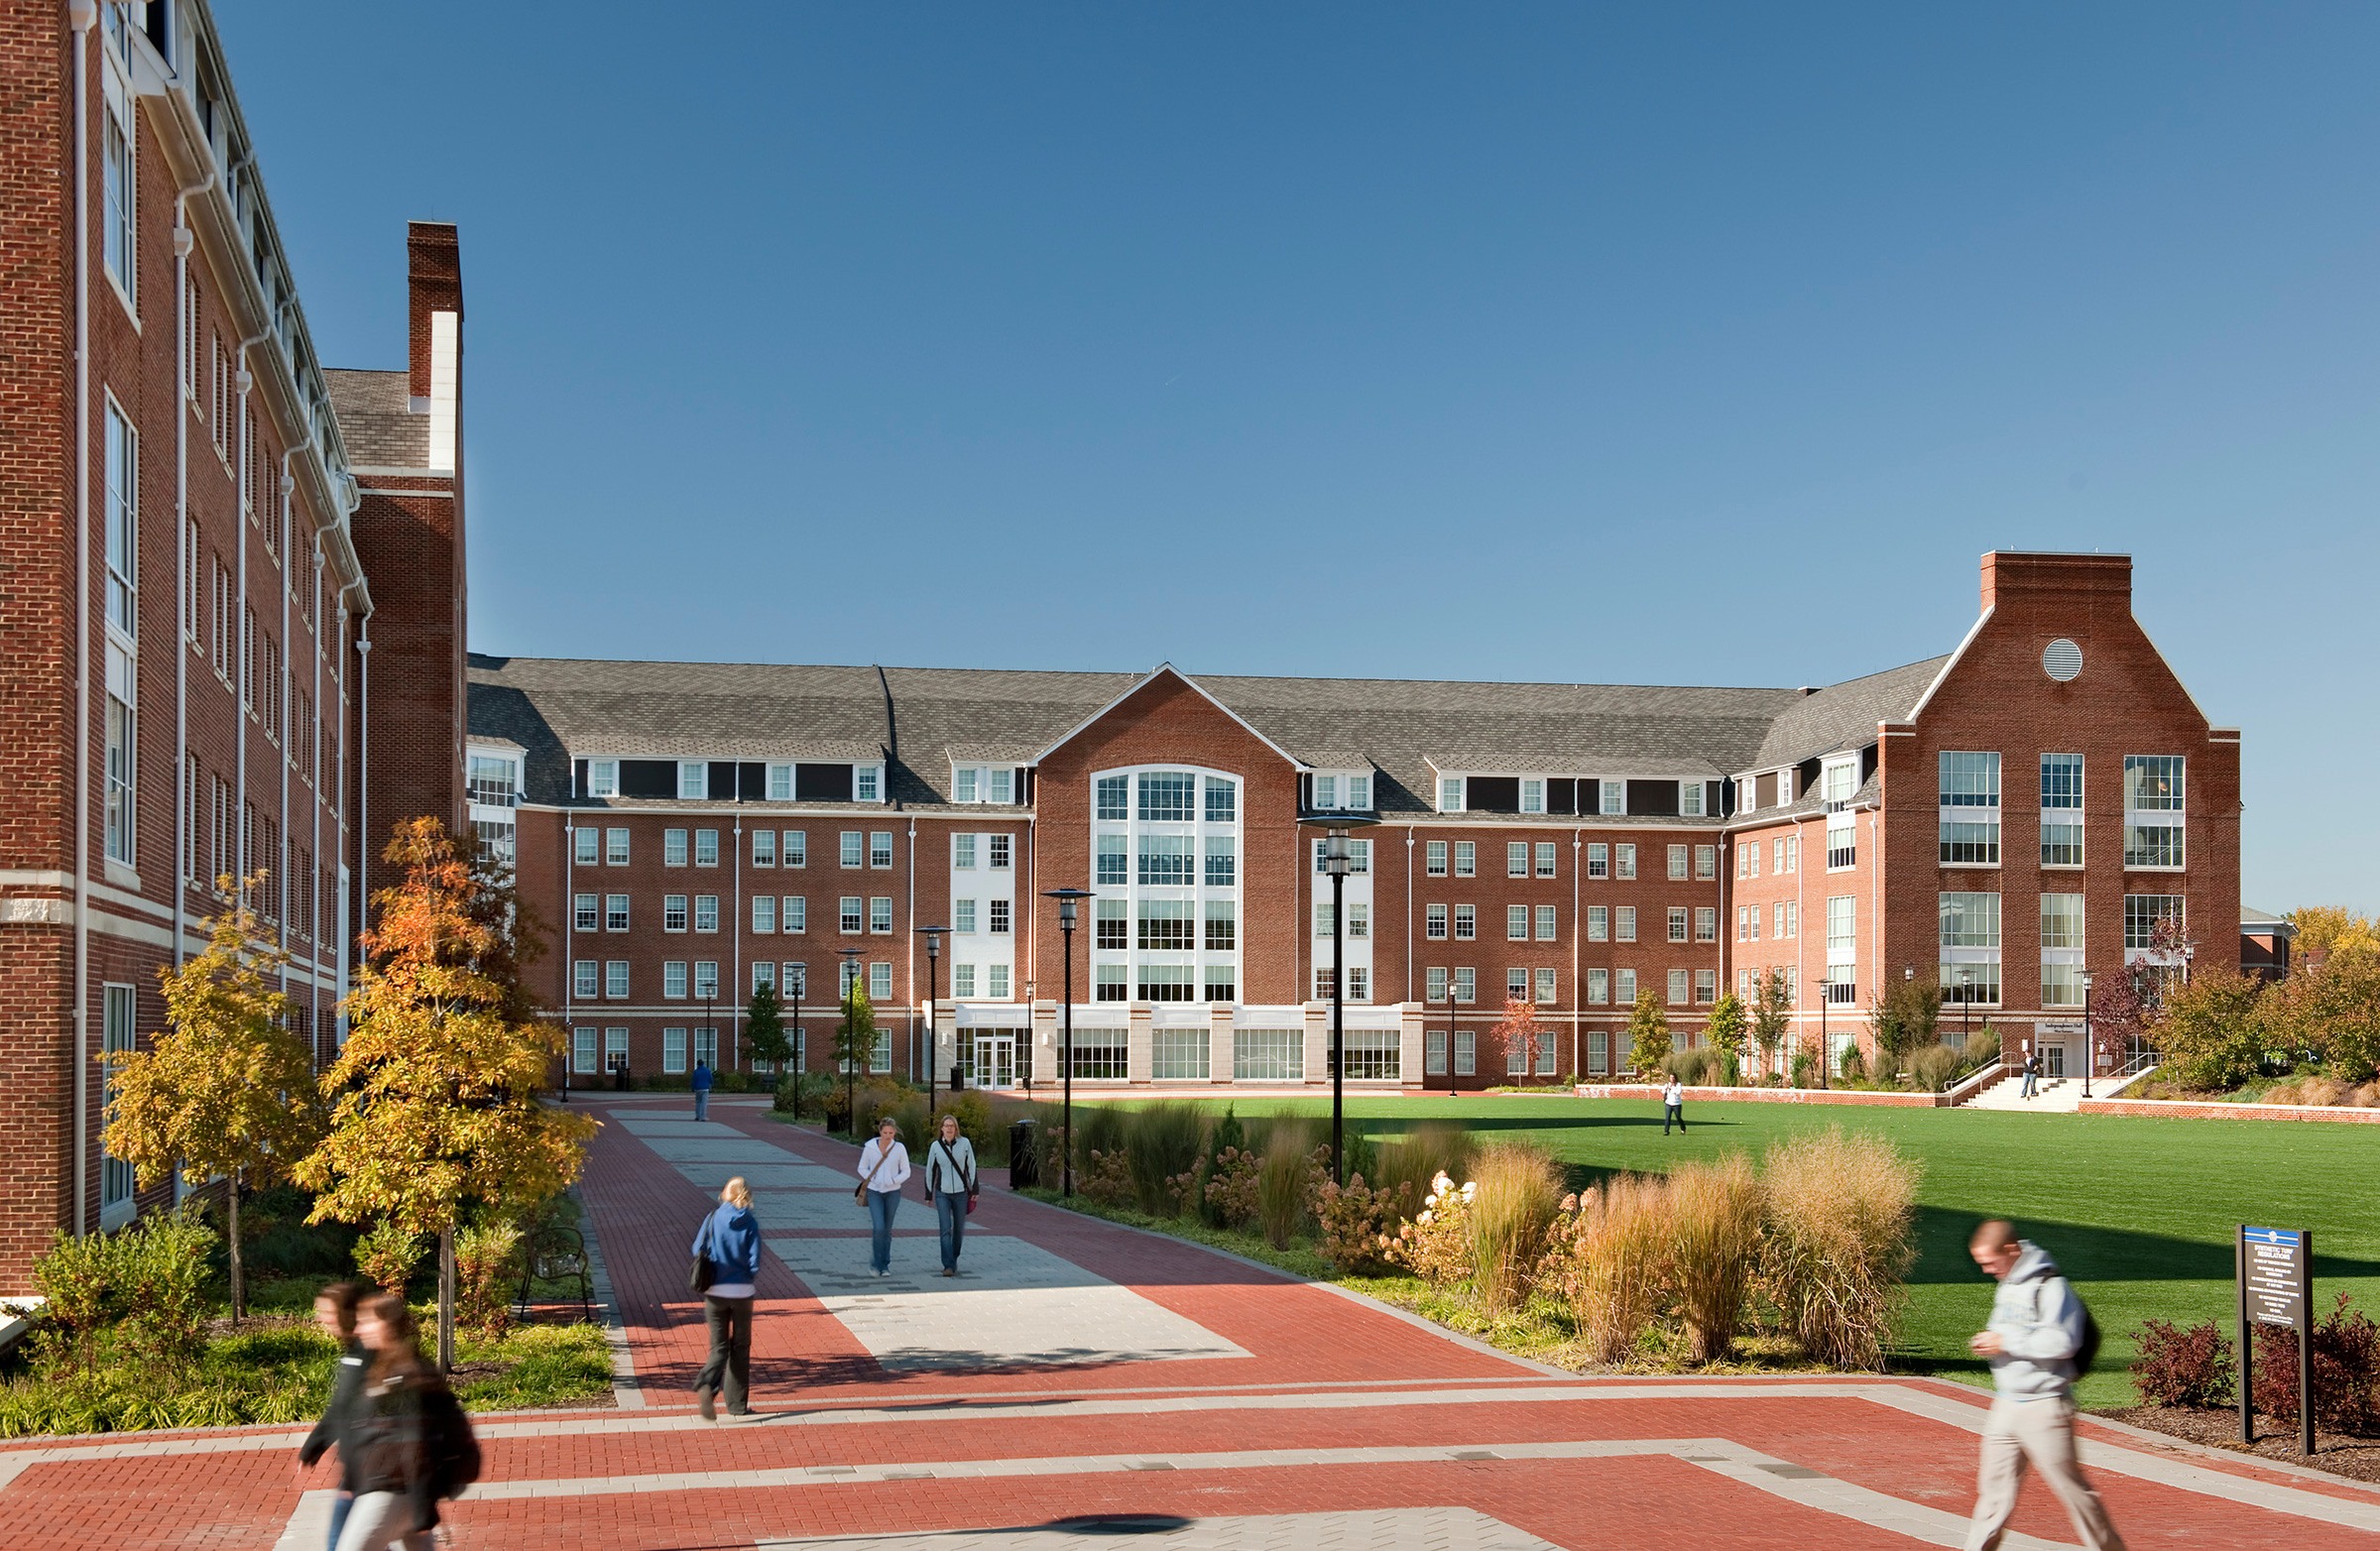 1 University Of Delaware Laird Campus Housing Exterior View 